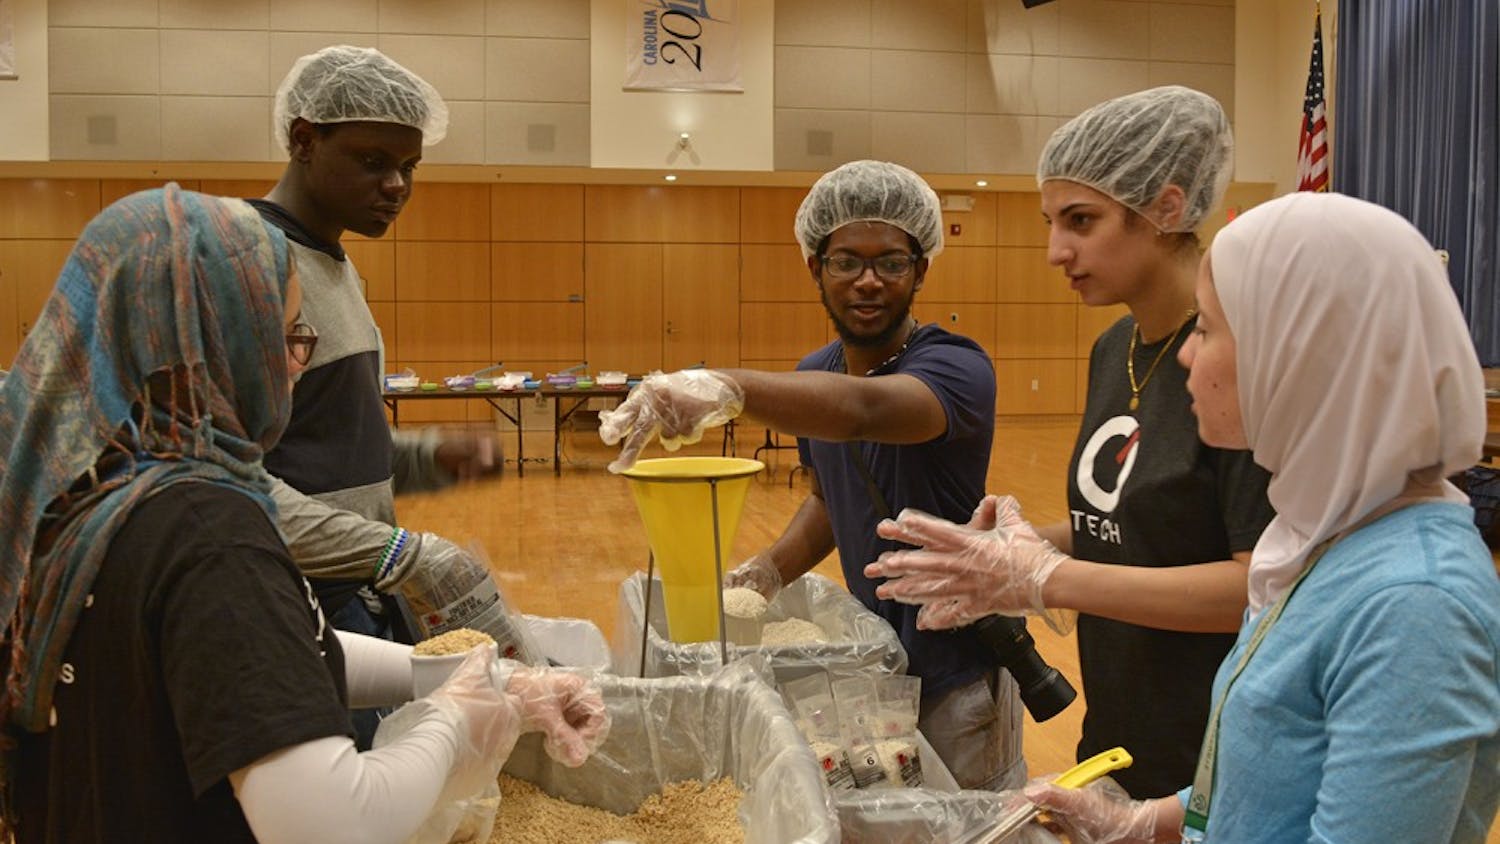 Volunteers from the UNC Muslim Student Association partnered with Rise Against Hunger (formerly Stop Hunger Now) to host a meal-packaging event in the Great Hall on Sunday, February 12. The event was held in remembrance of Our Three Winners.